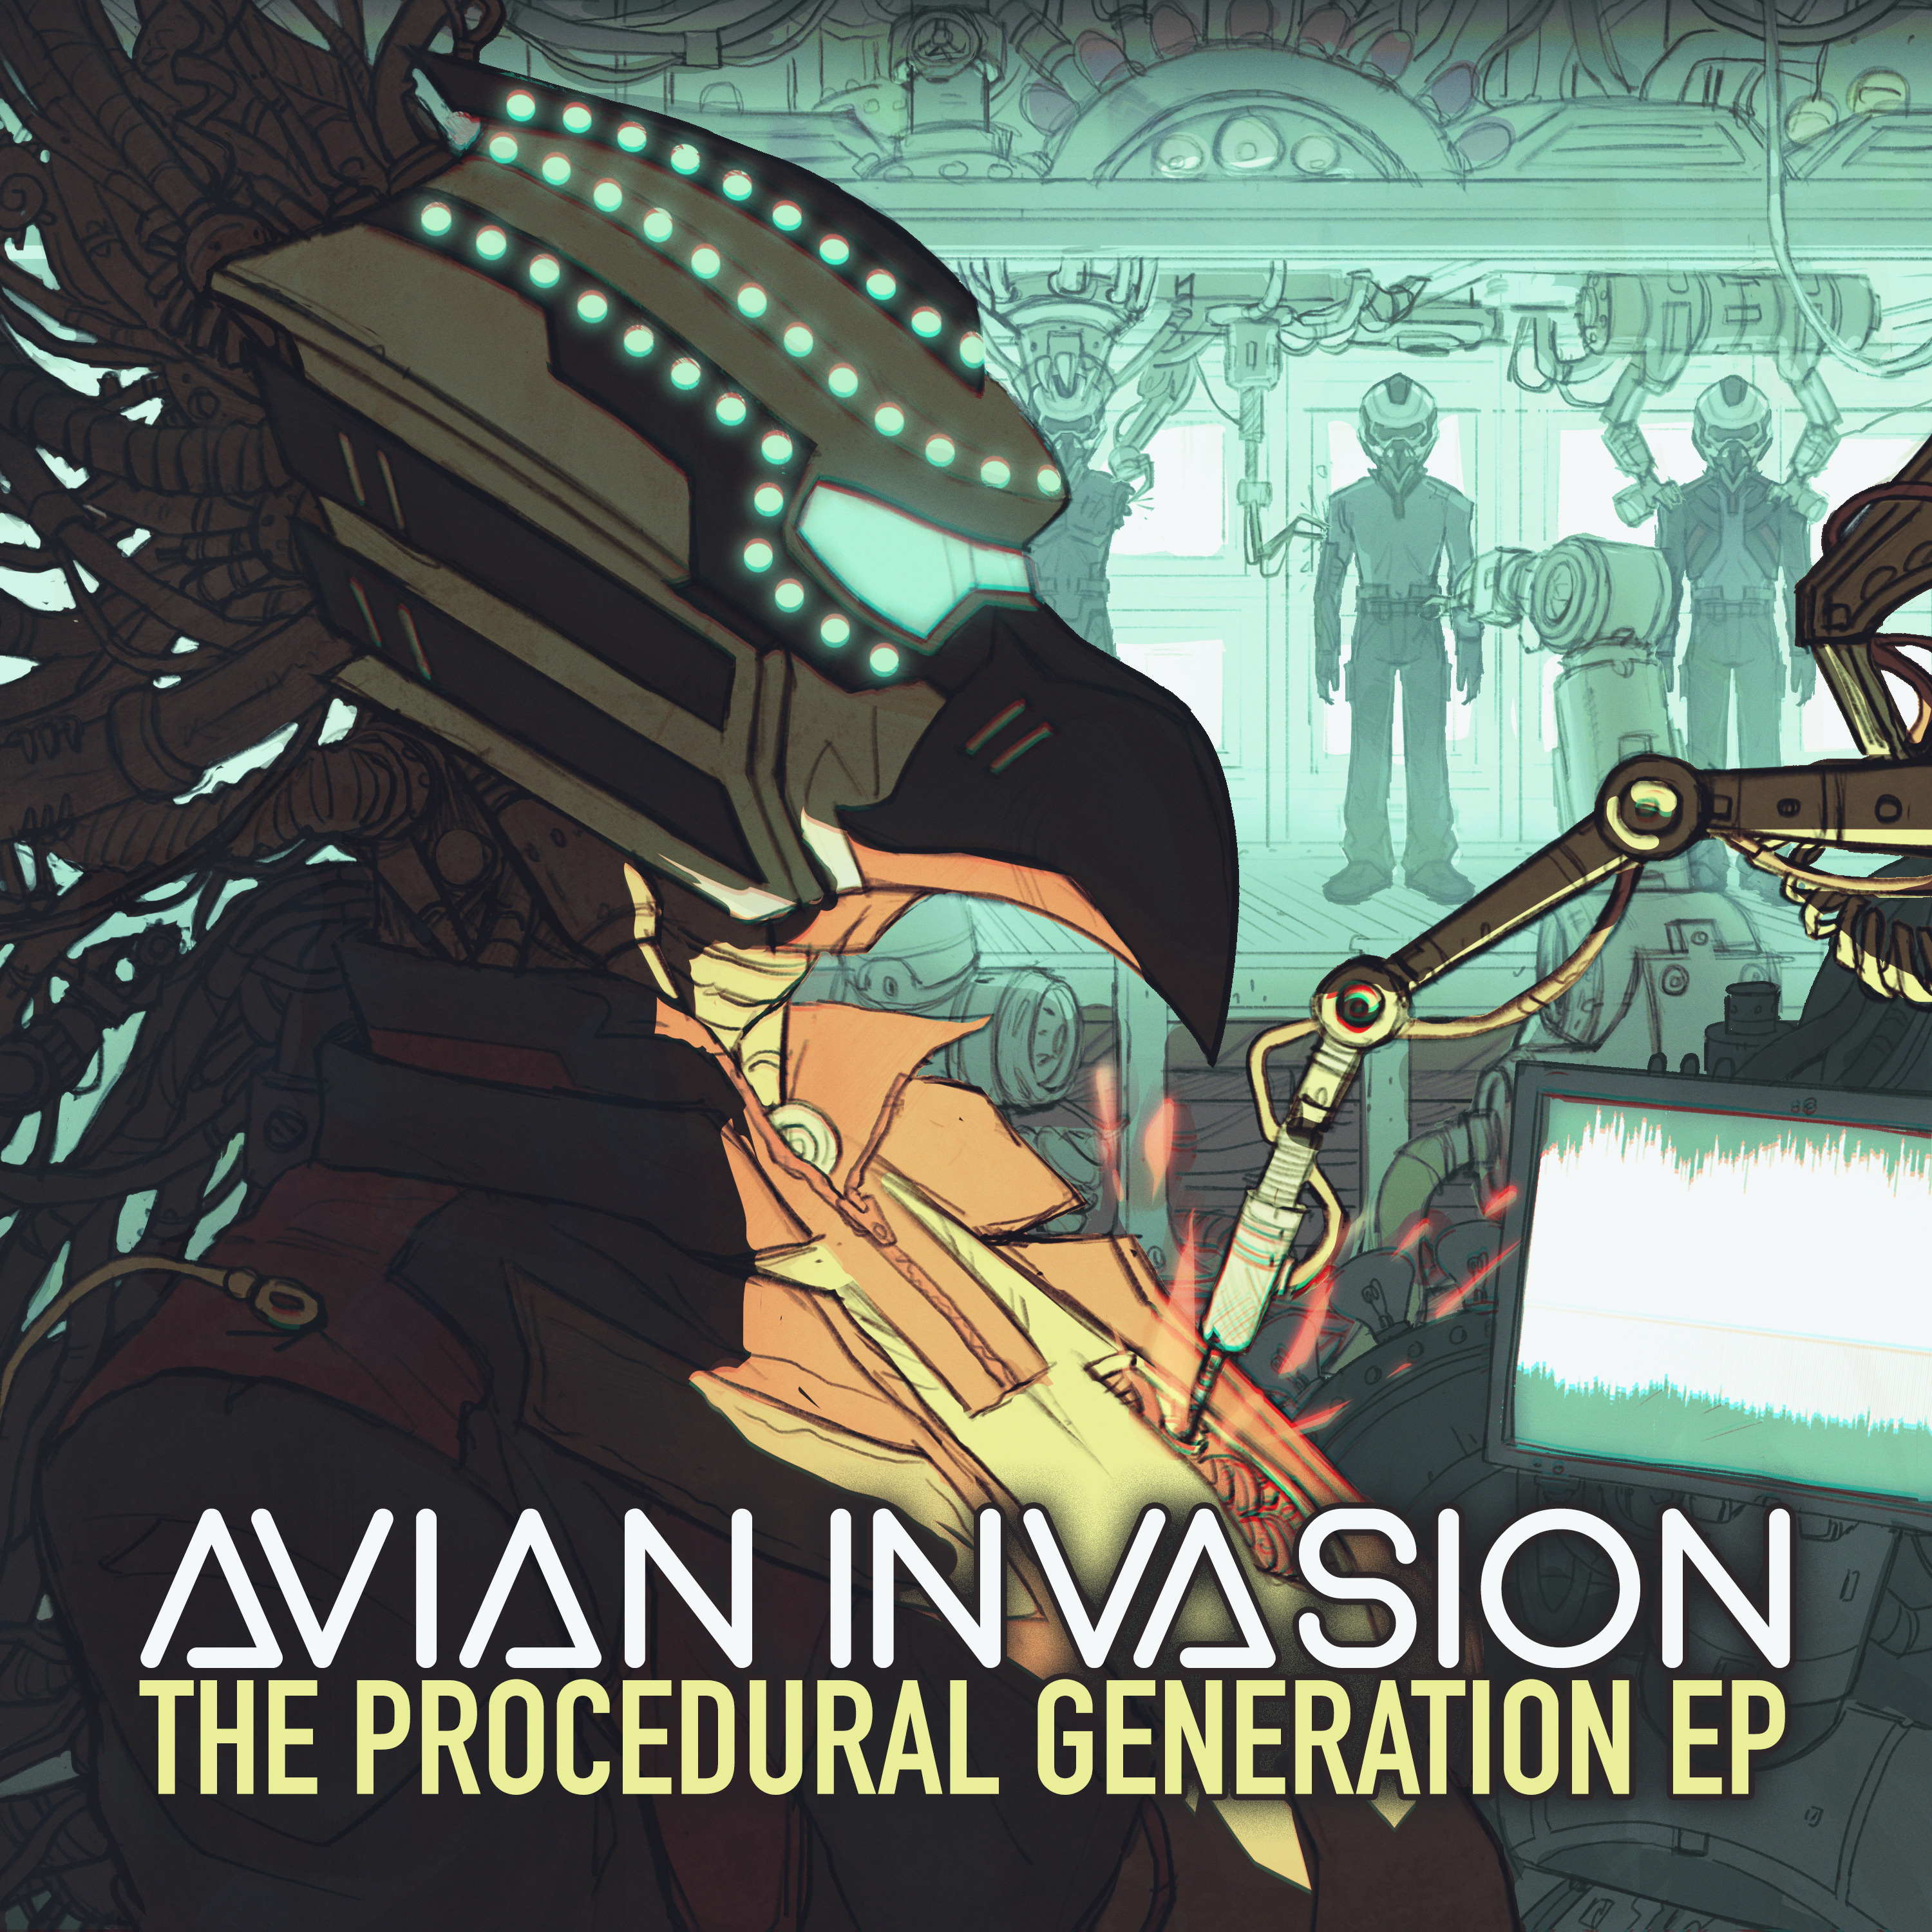 The-Procedural-Generation-EP-Cover-3000x